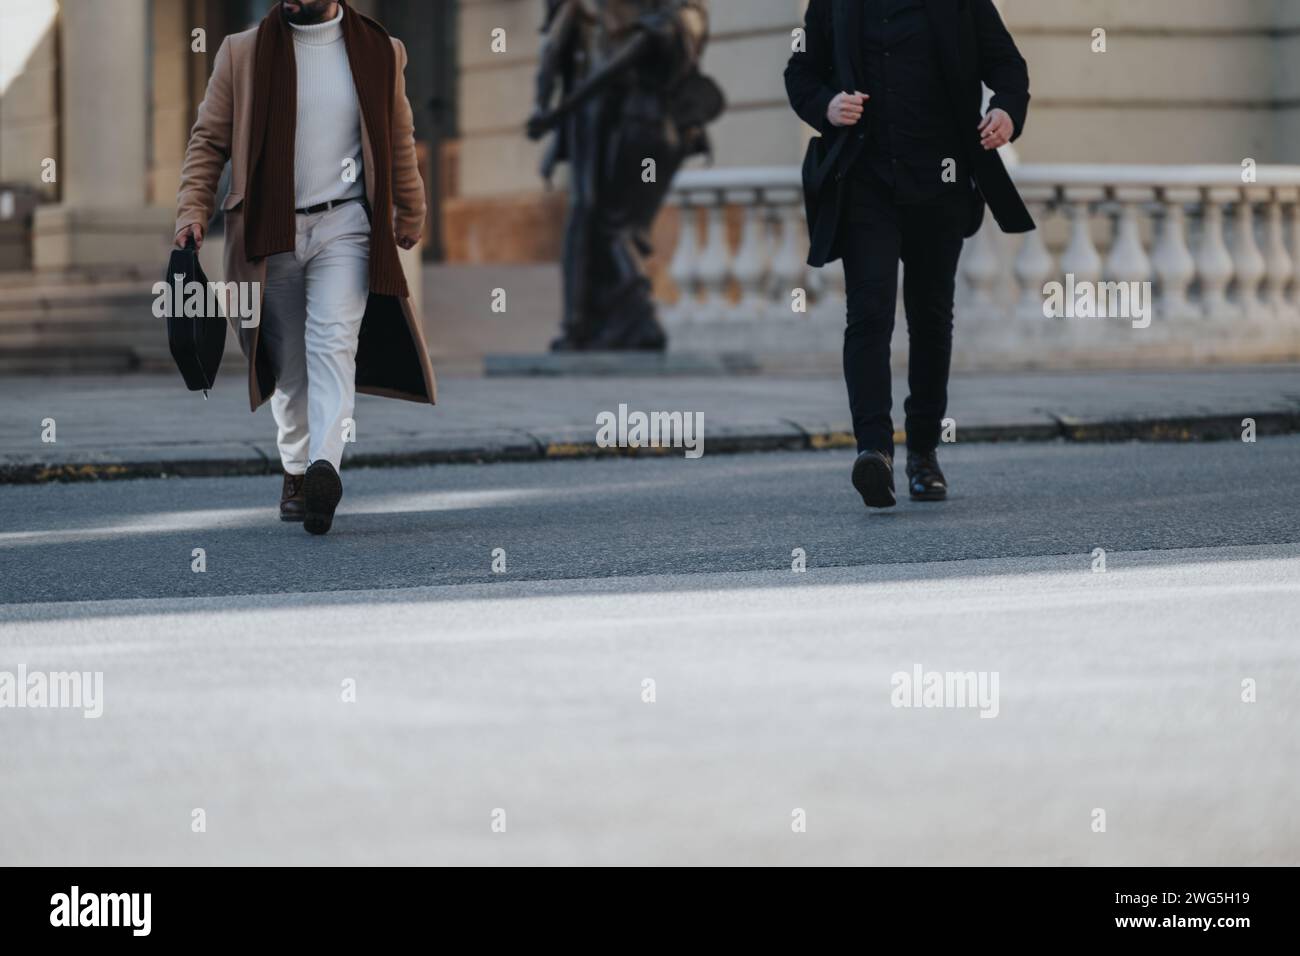 Captured mid stride, this image depicts two men in business attire confidently crossing an urban street, showcasing style and purpose. Stock Photo